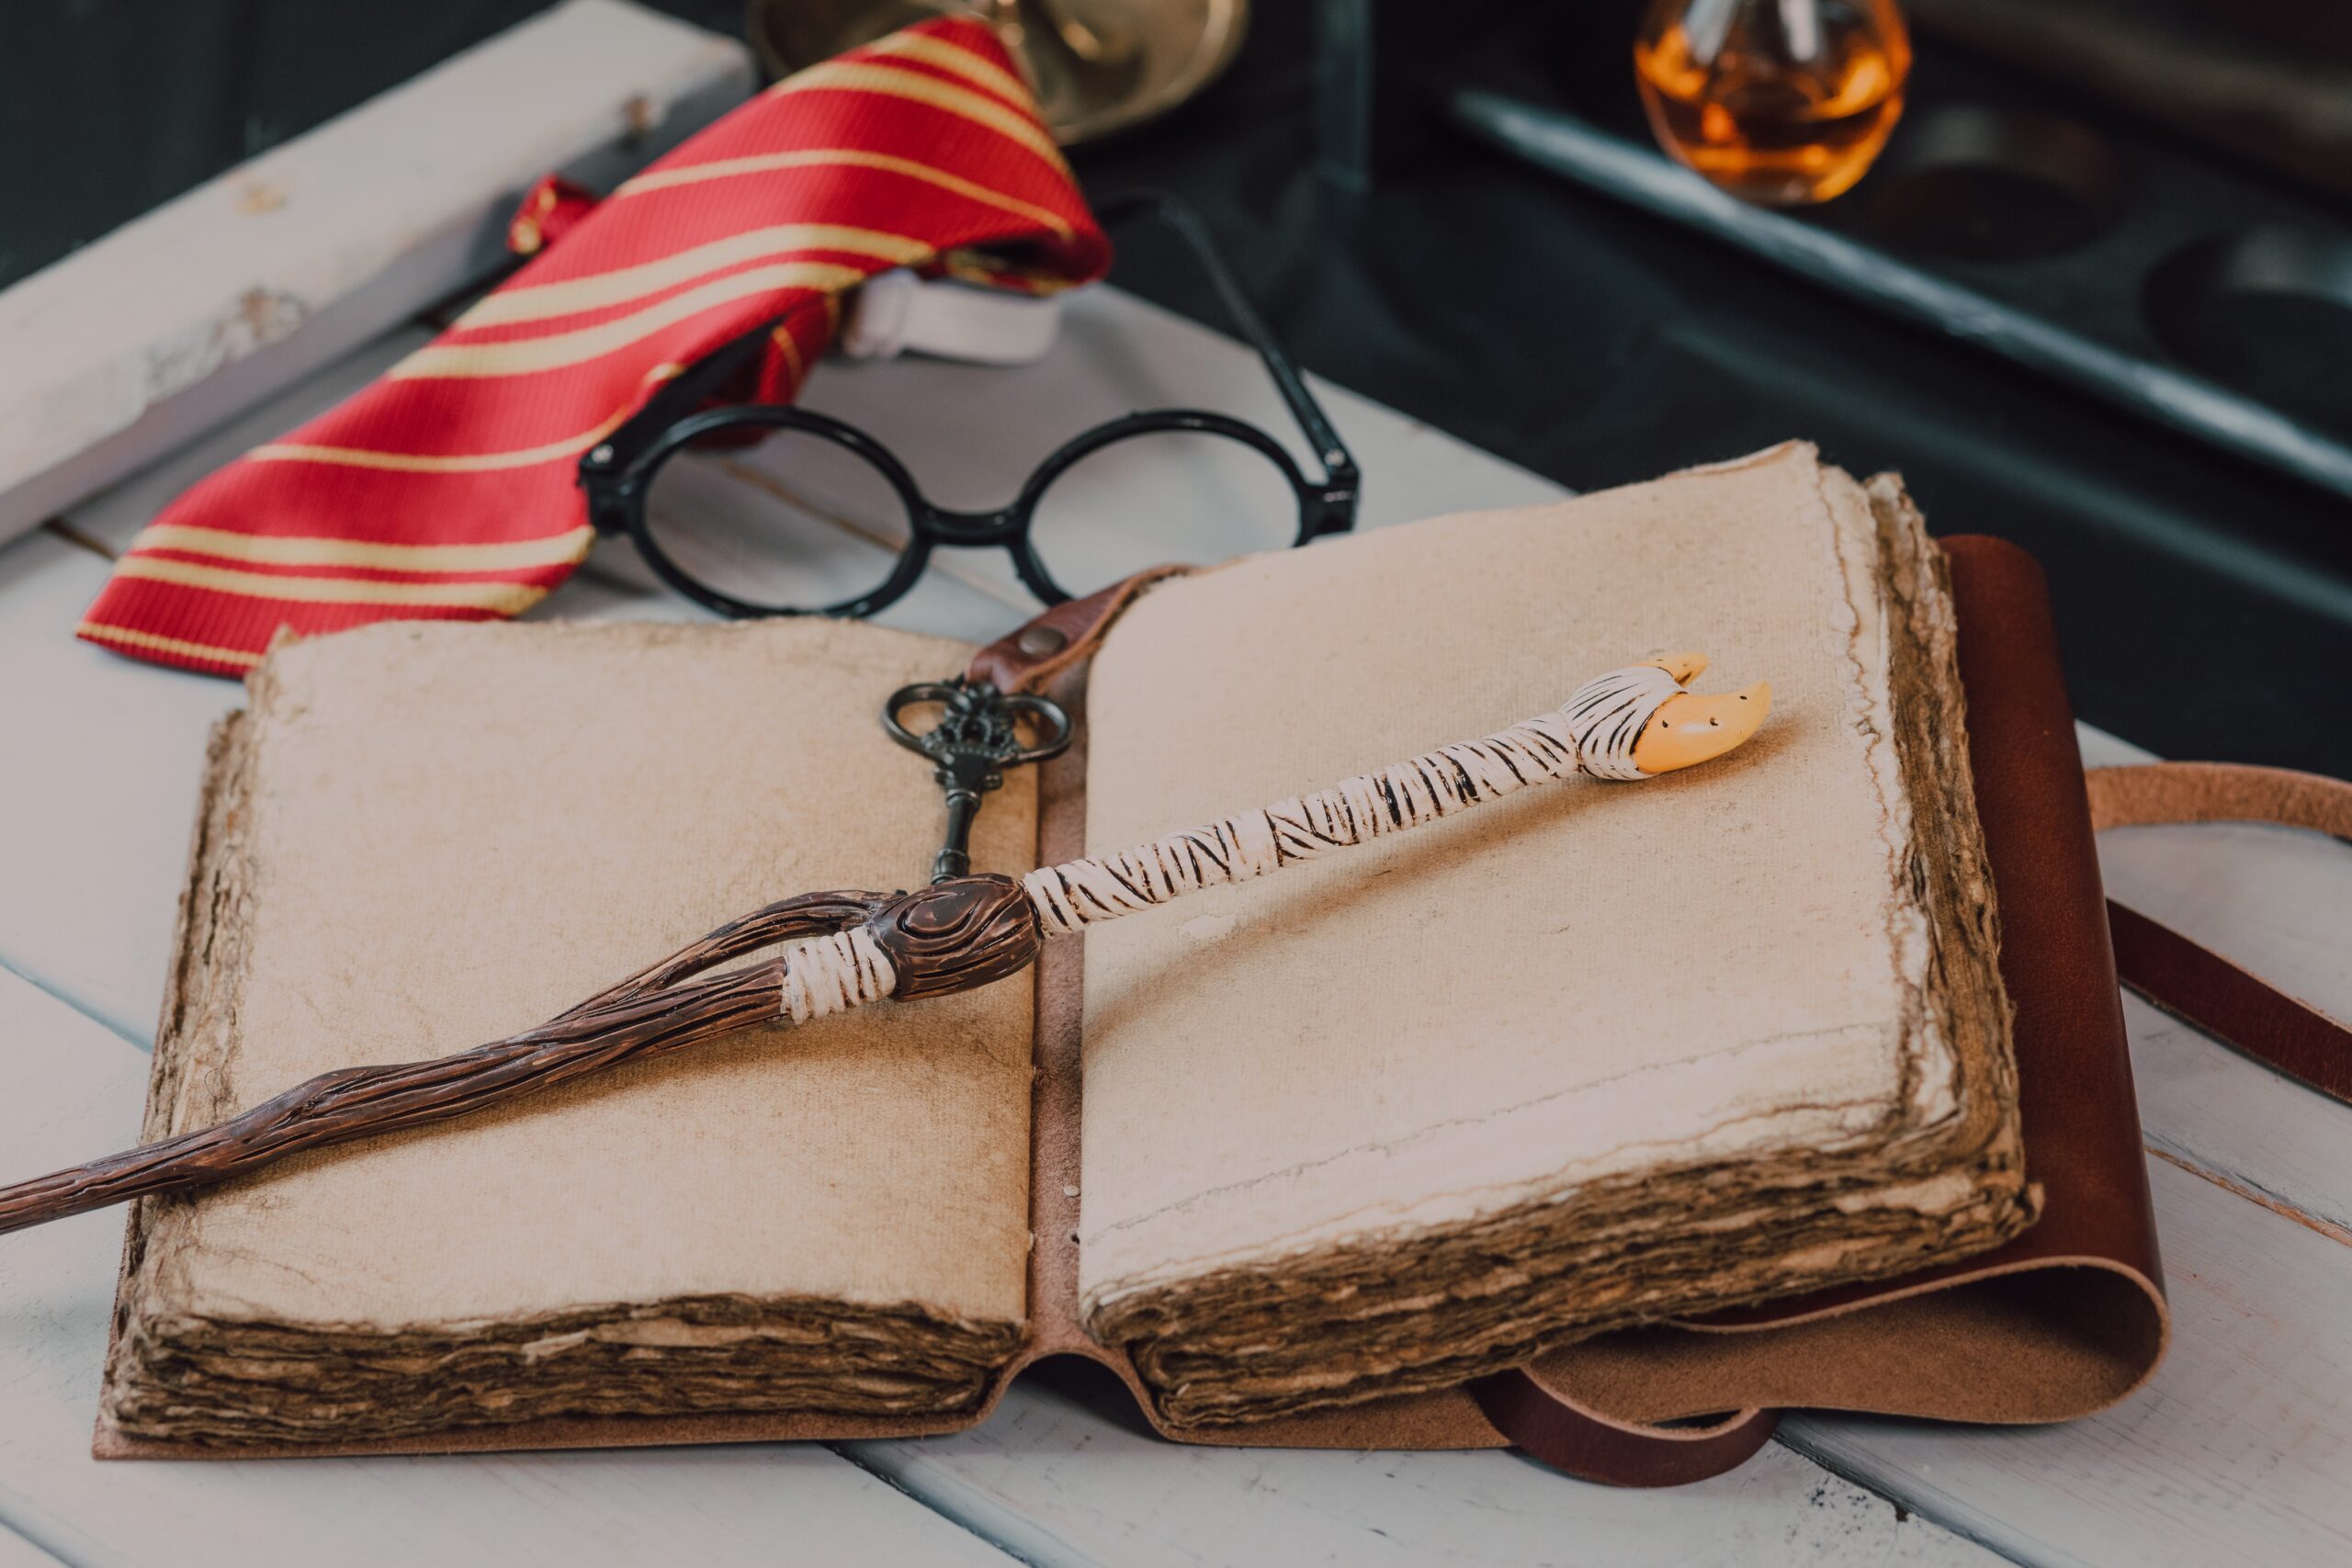 Photo by RODNAE Productions: https://www.pexels.com/photo/close-up-shot-of-a-wand-beside-a-spell-book-7978986/